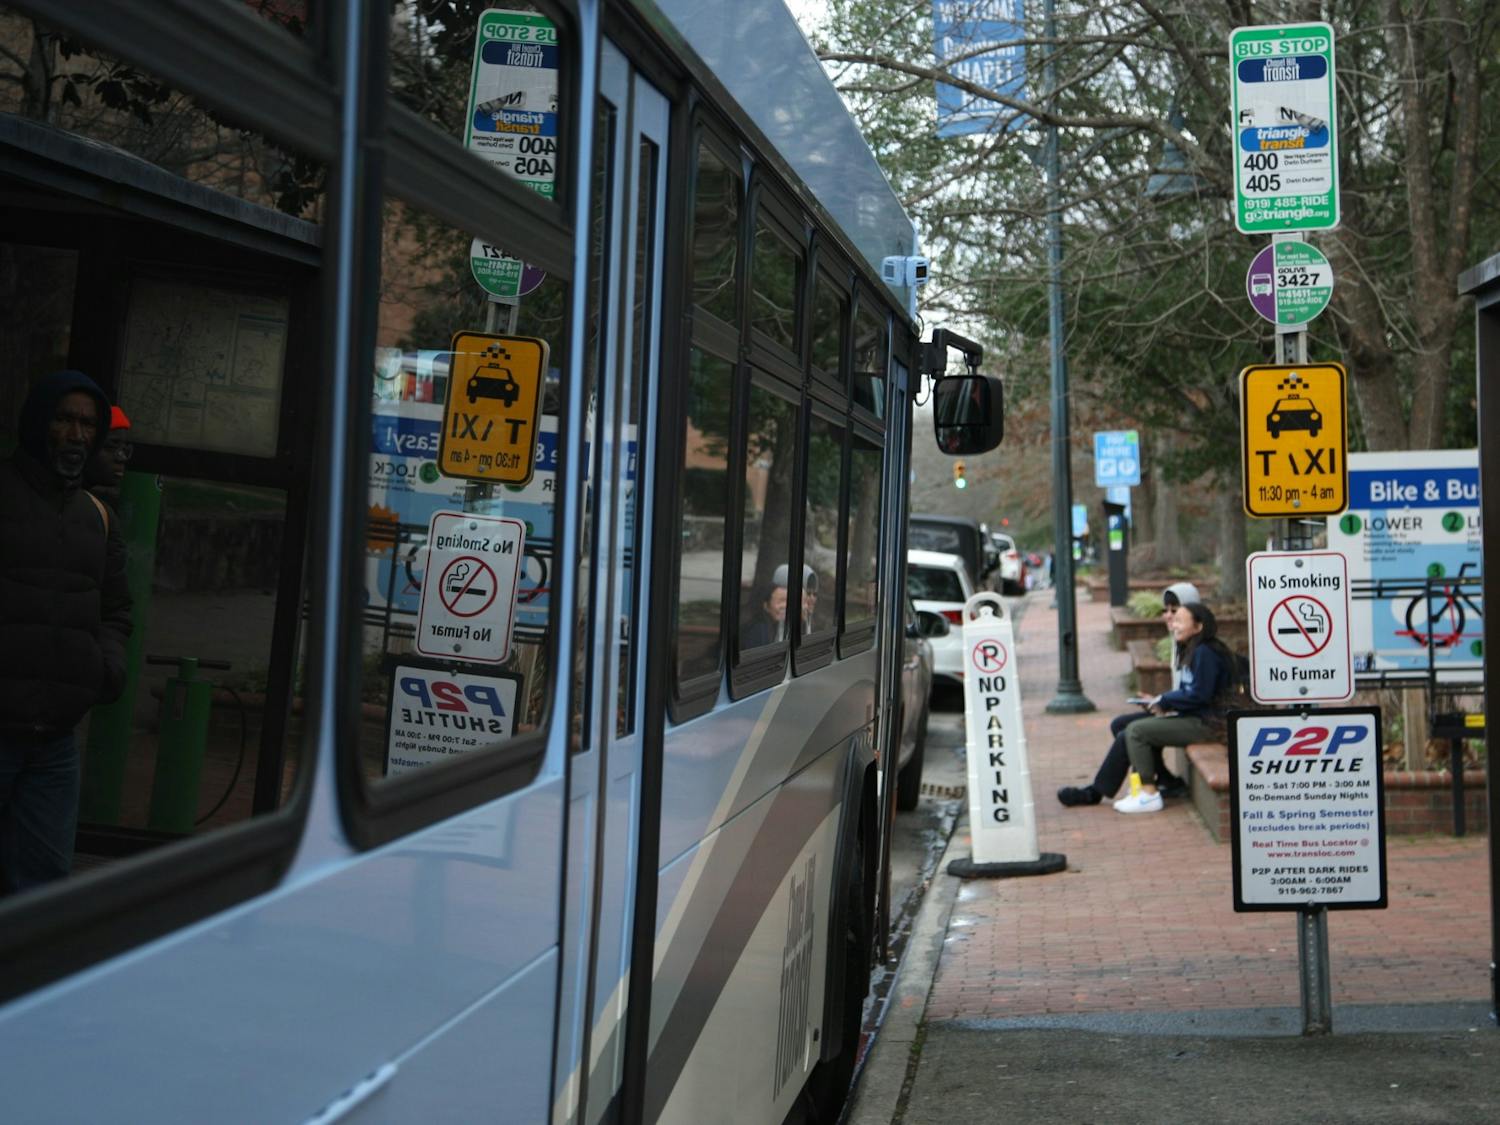 A Chapel Hill Transit bus stops outside Carolina Coffee Shop on Franklin Street on Feb. 7, 2020. The Civic Engagement Action Coalition of Transportation will launch a voting shuttle that will take students directly from South Campus to the early voting site on Feb. 27 and Feb. 28, 2020. The voting shuttle will run non-stop from 10 a.m to 6 p.m.